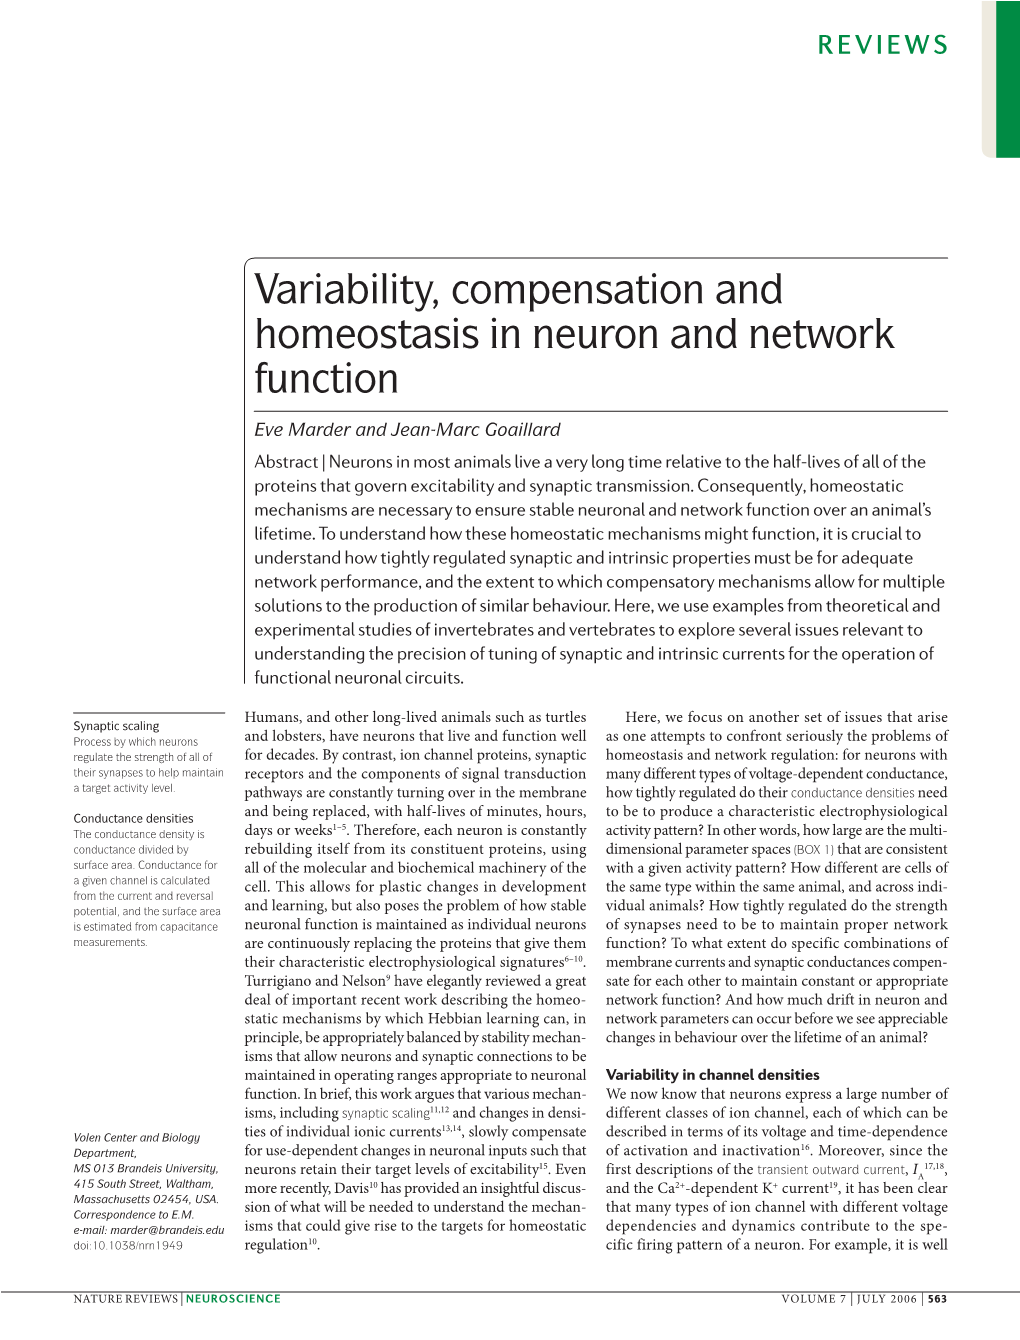 Variability, Compensation and Homeostasis in Neuron and Network Function